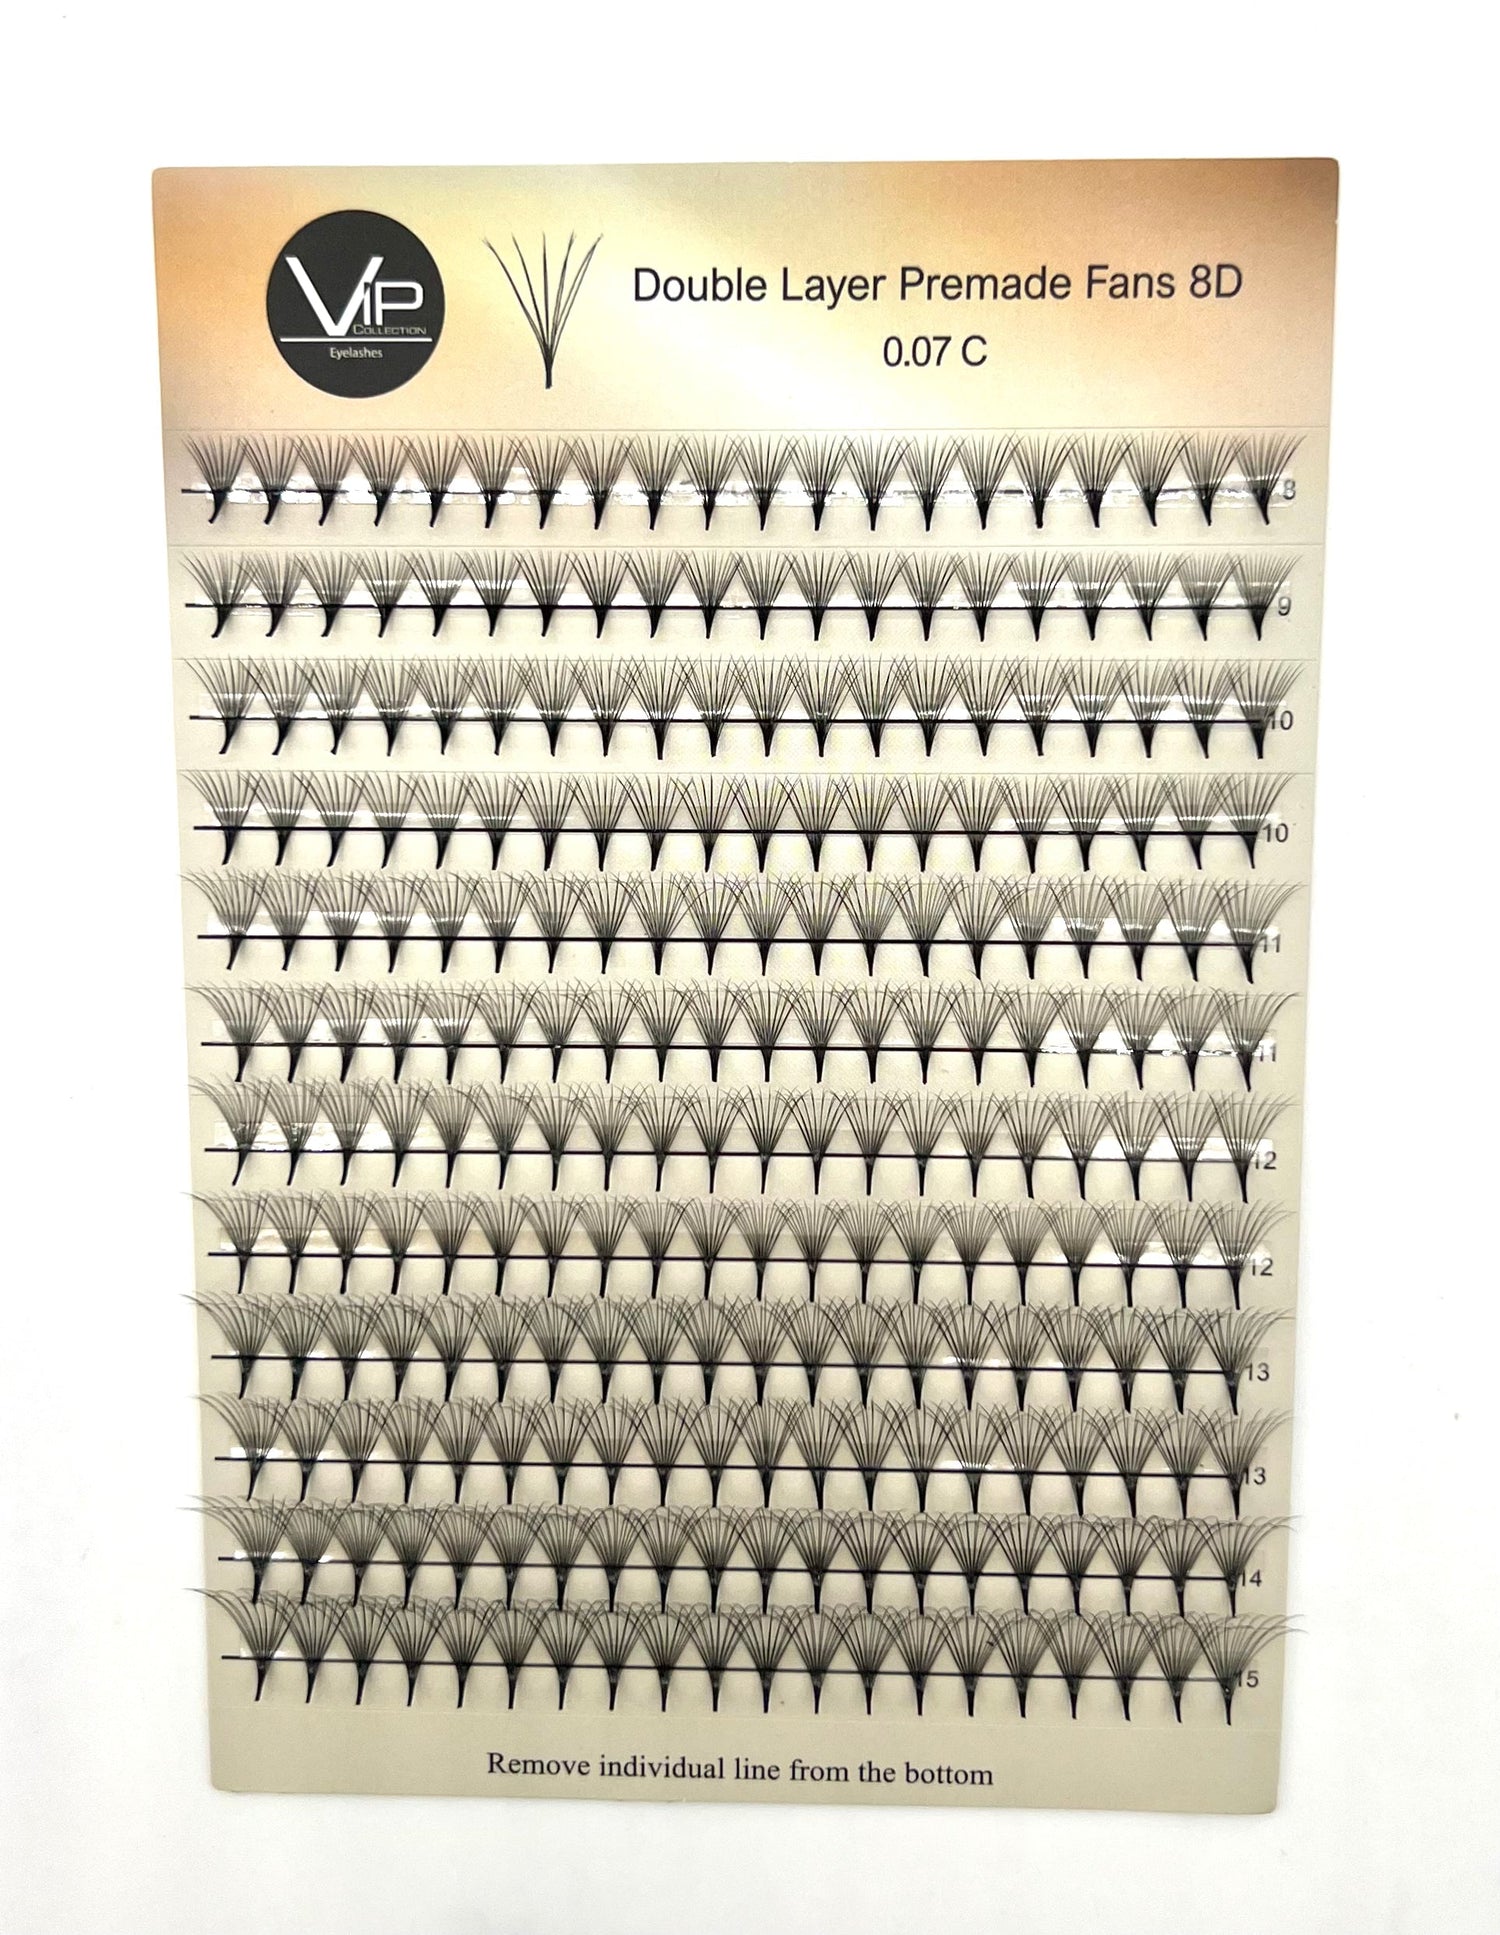 Double Layer Premade Fans 5D 8D MIX 8-15 - VIP Extensions